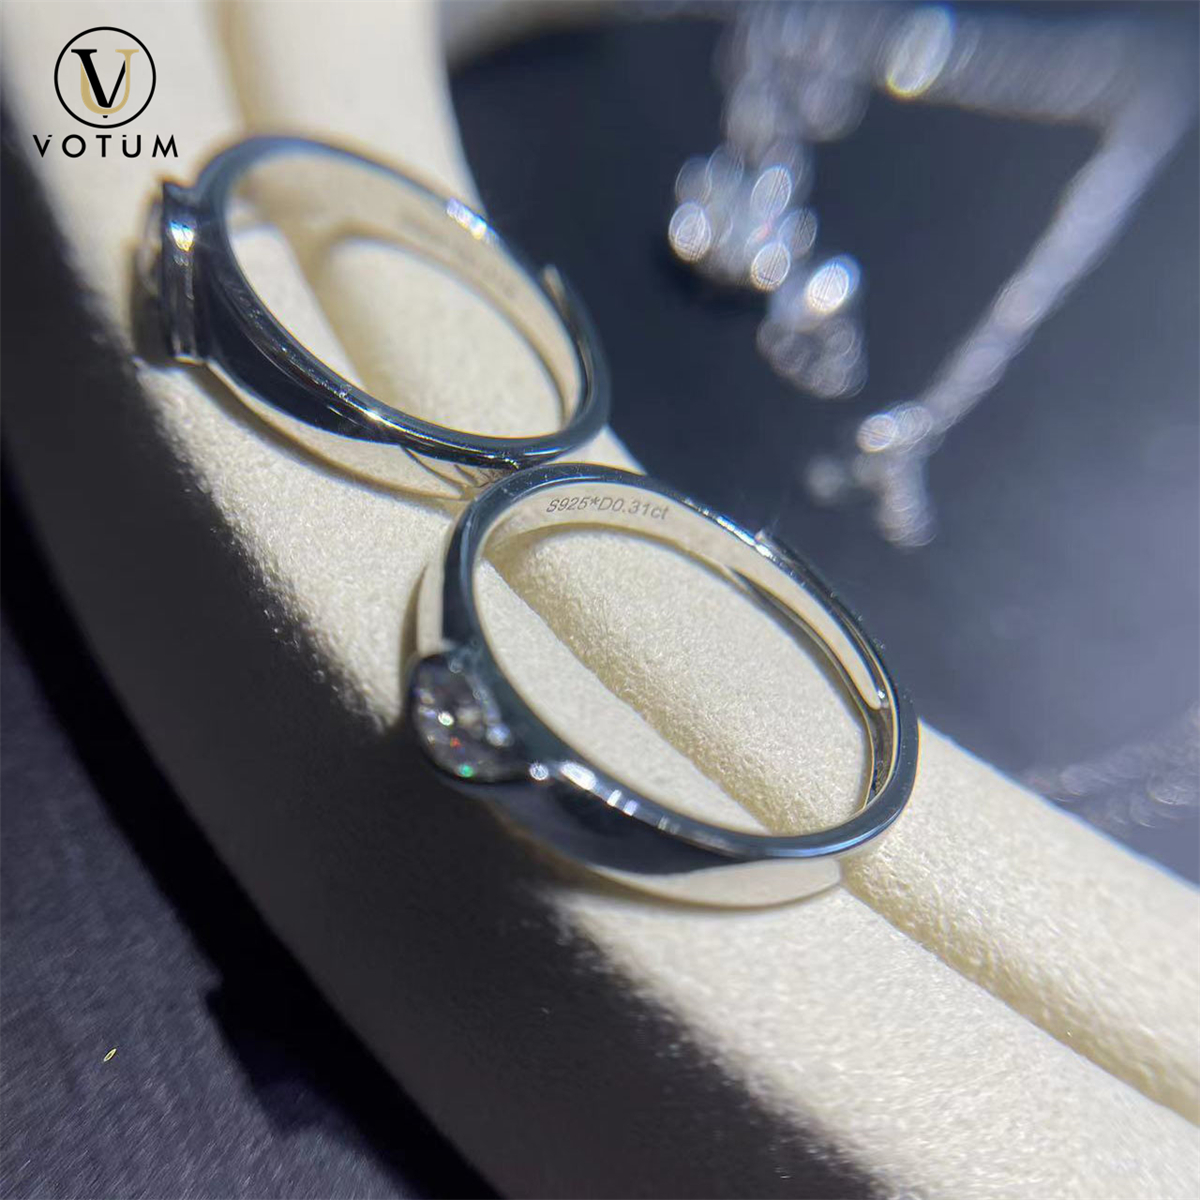 Votum Fashion 2PCS 925 Silver Wedding Engagement Ring with 18K Gold Plated Factory Wholesale Custom Fine Jewelry Jewellery Accessories